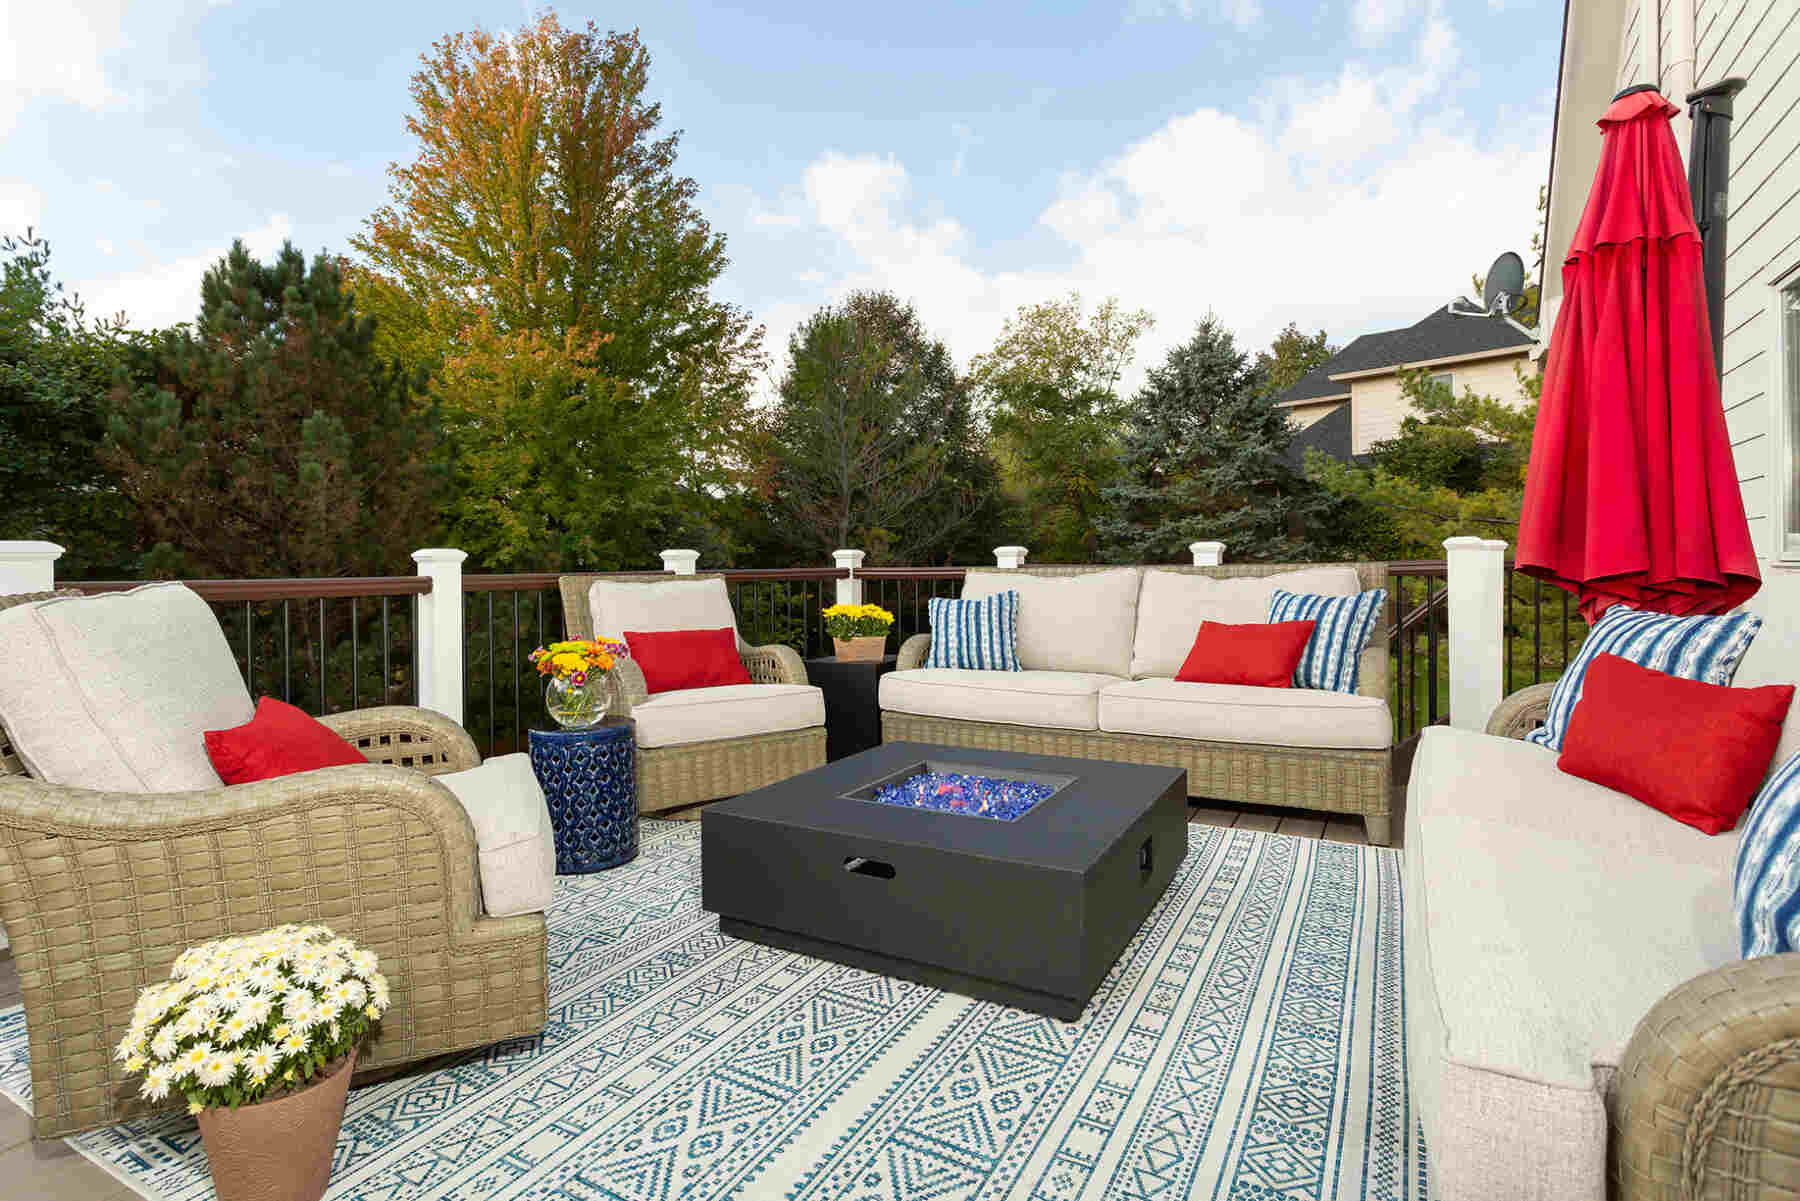 Outdoor patio with blue printed rug and matching weaved furniture